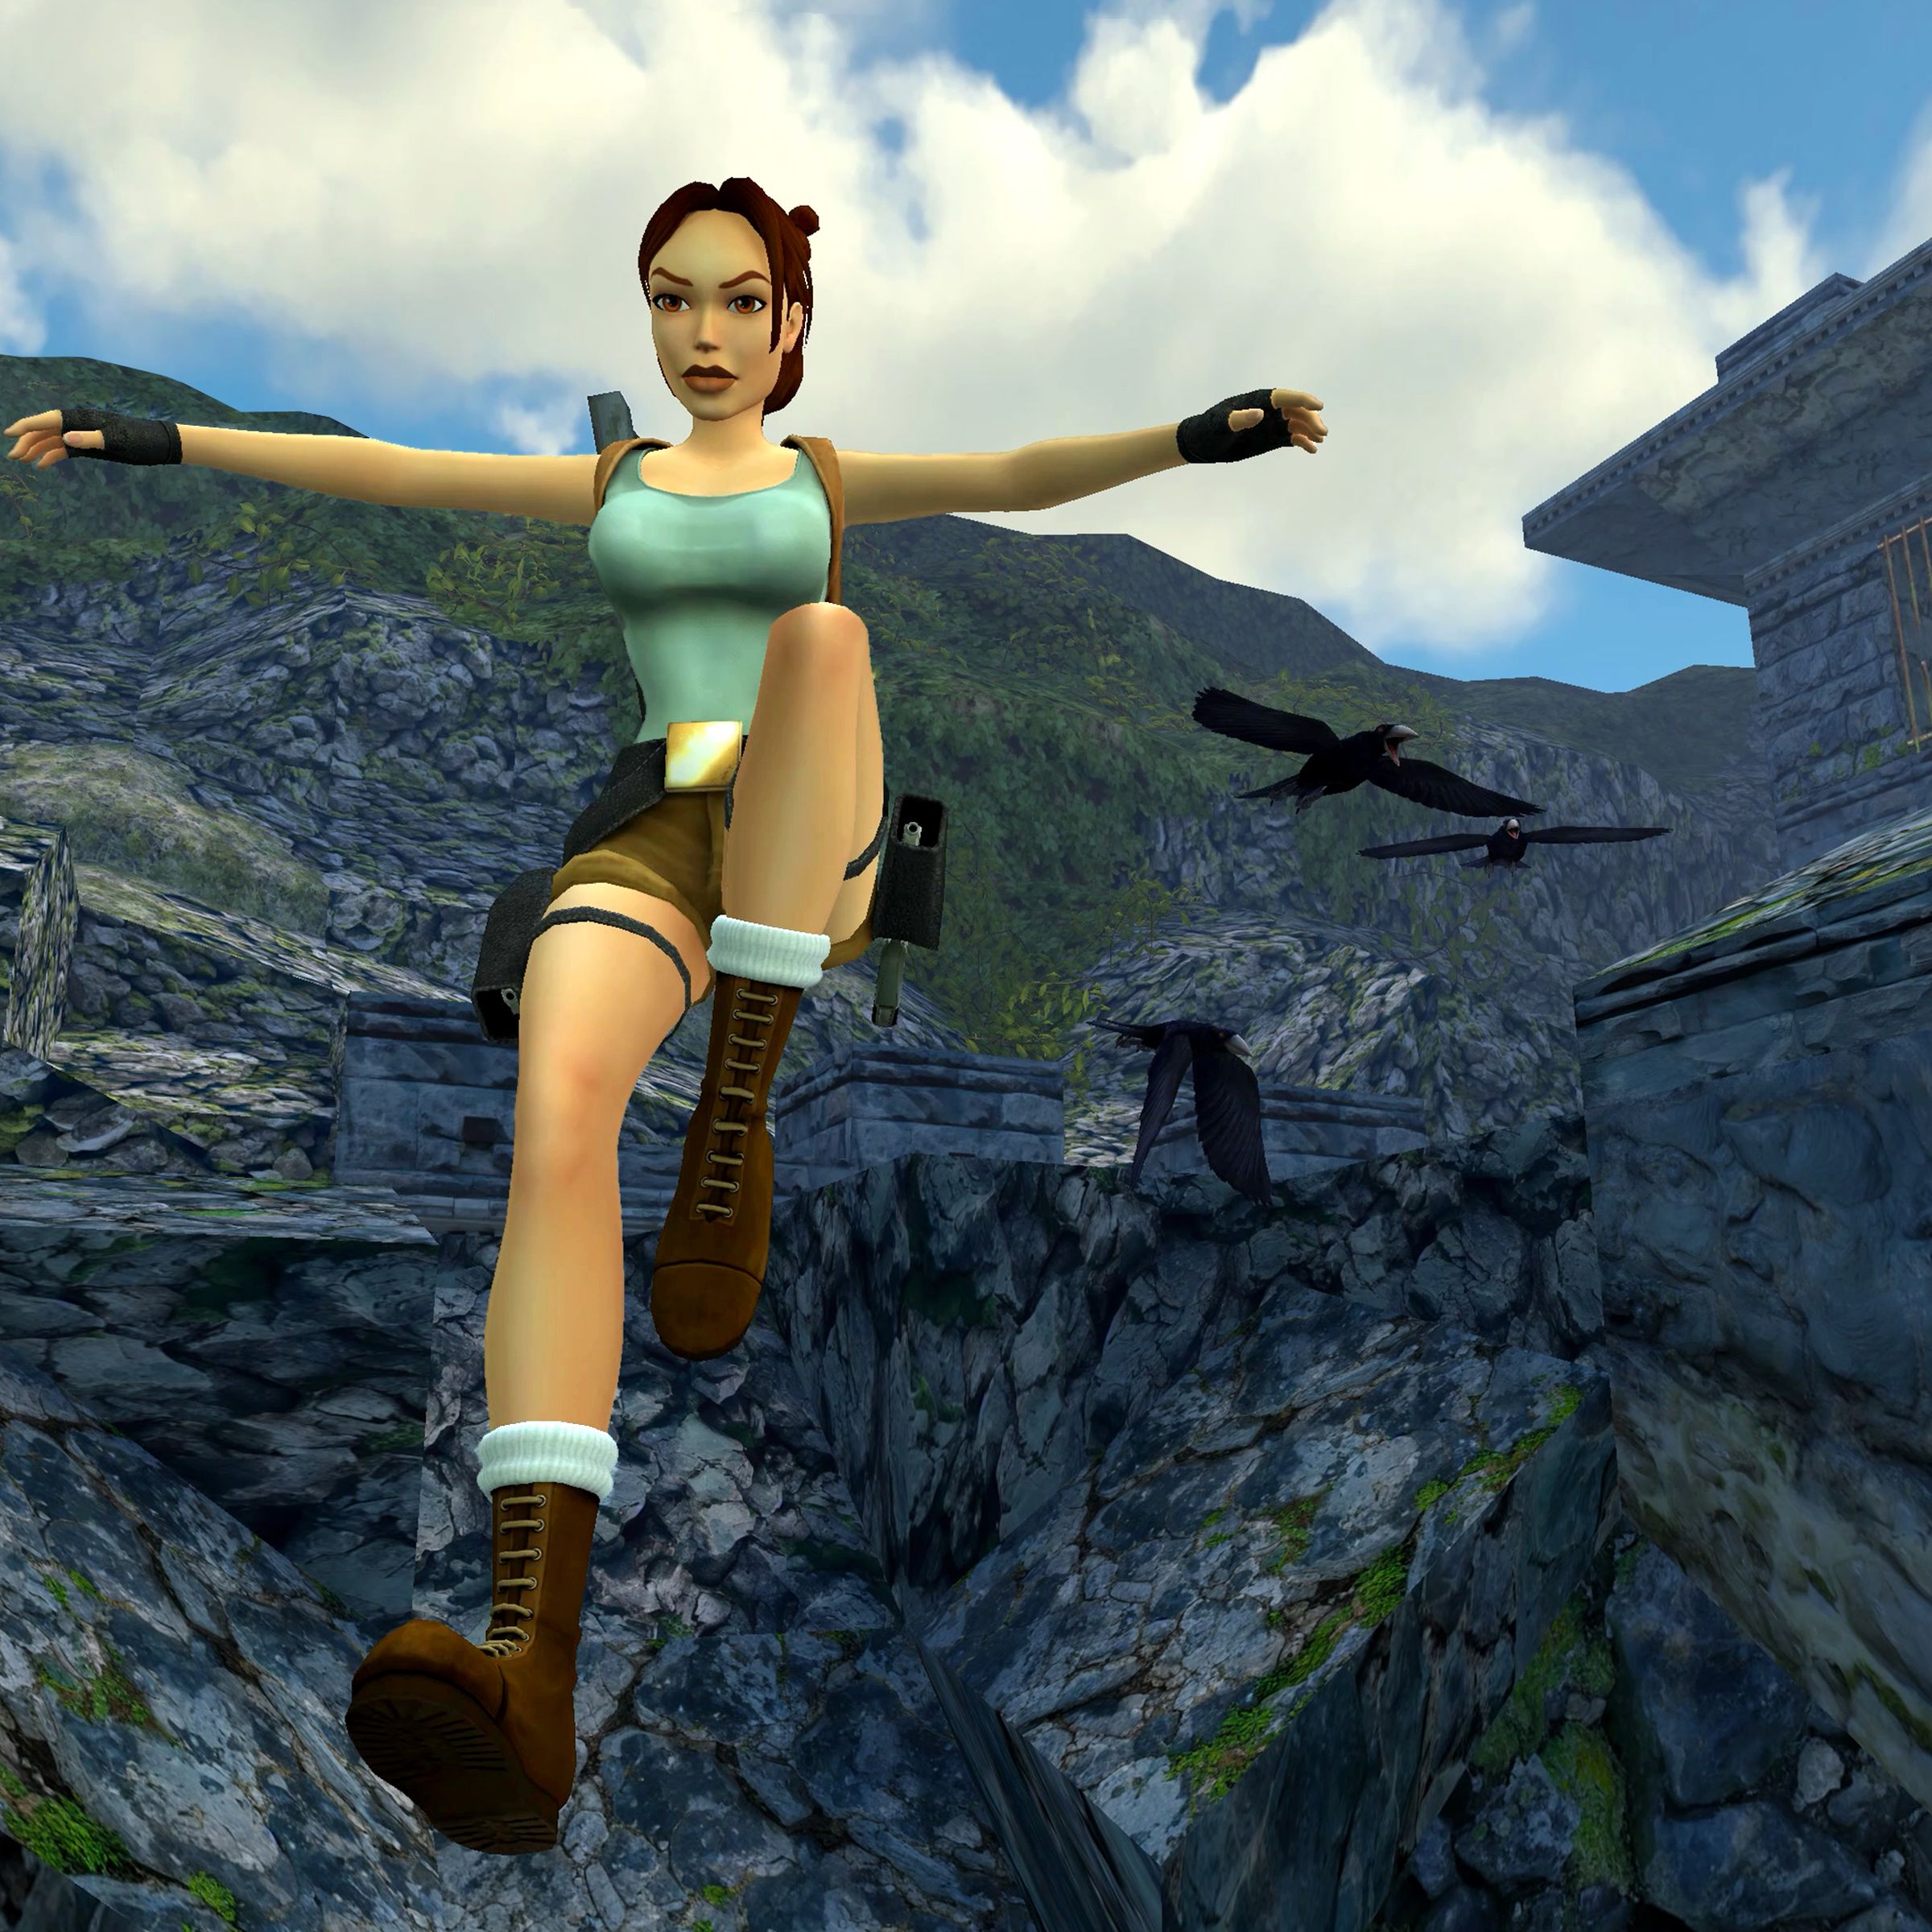 Screenshot from Tomb Raider 1-3 Remastered featuring Lara Croft jumping in the air with a mountain behind her.